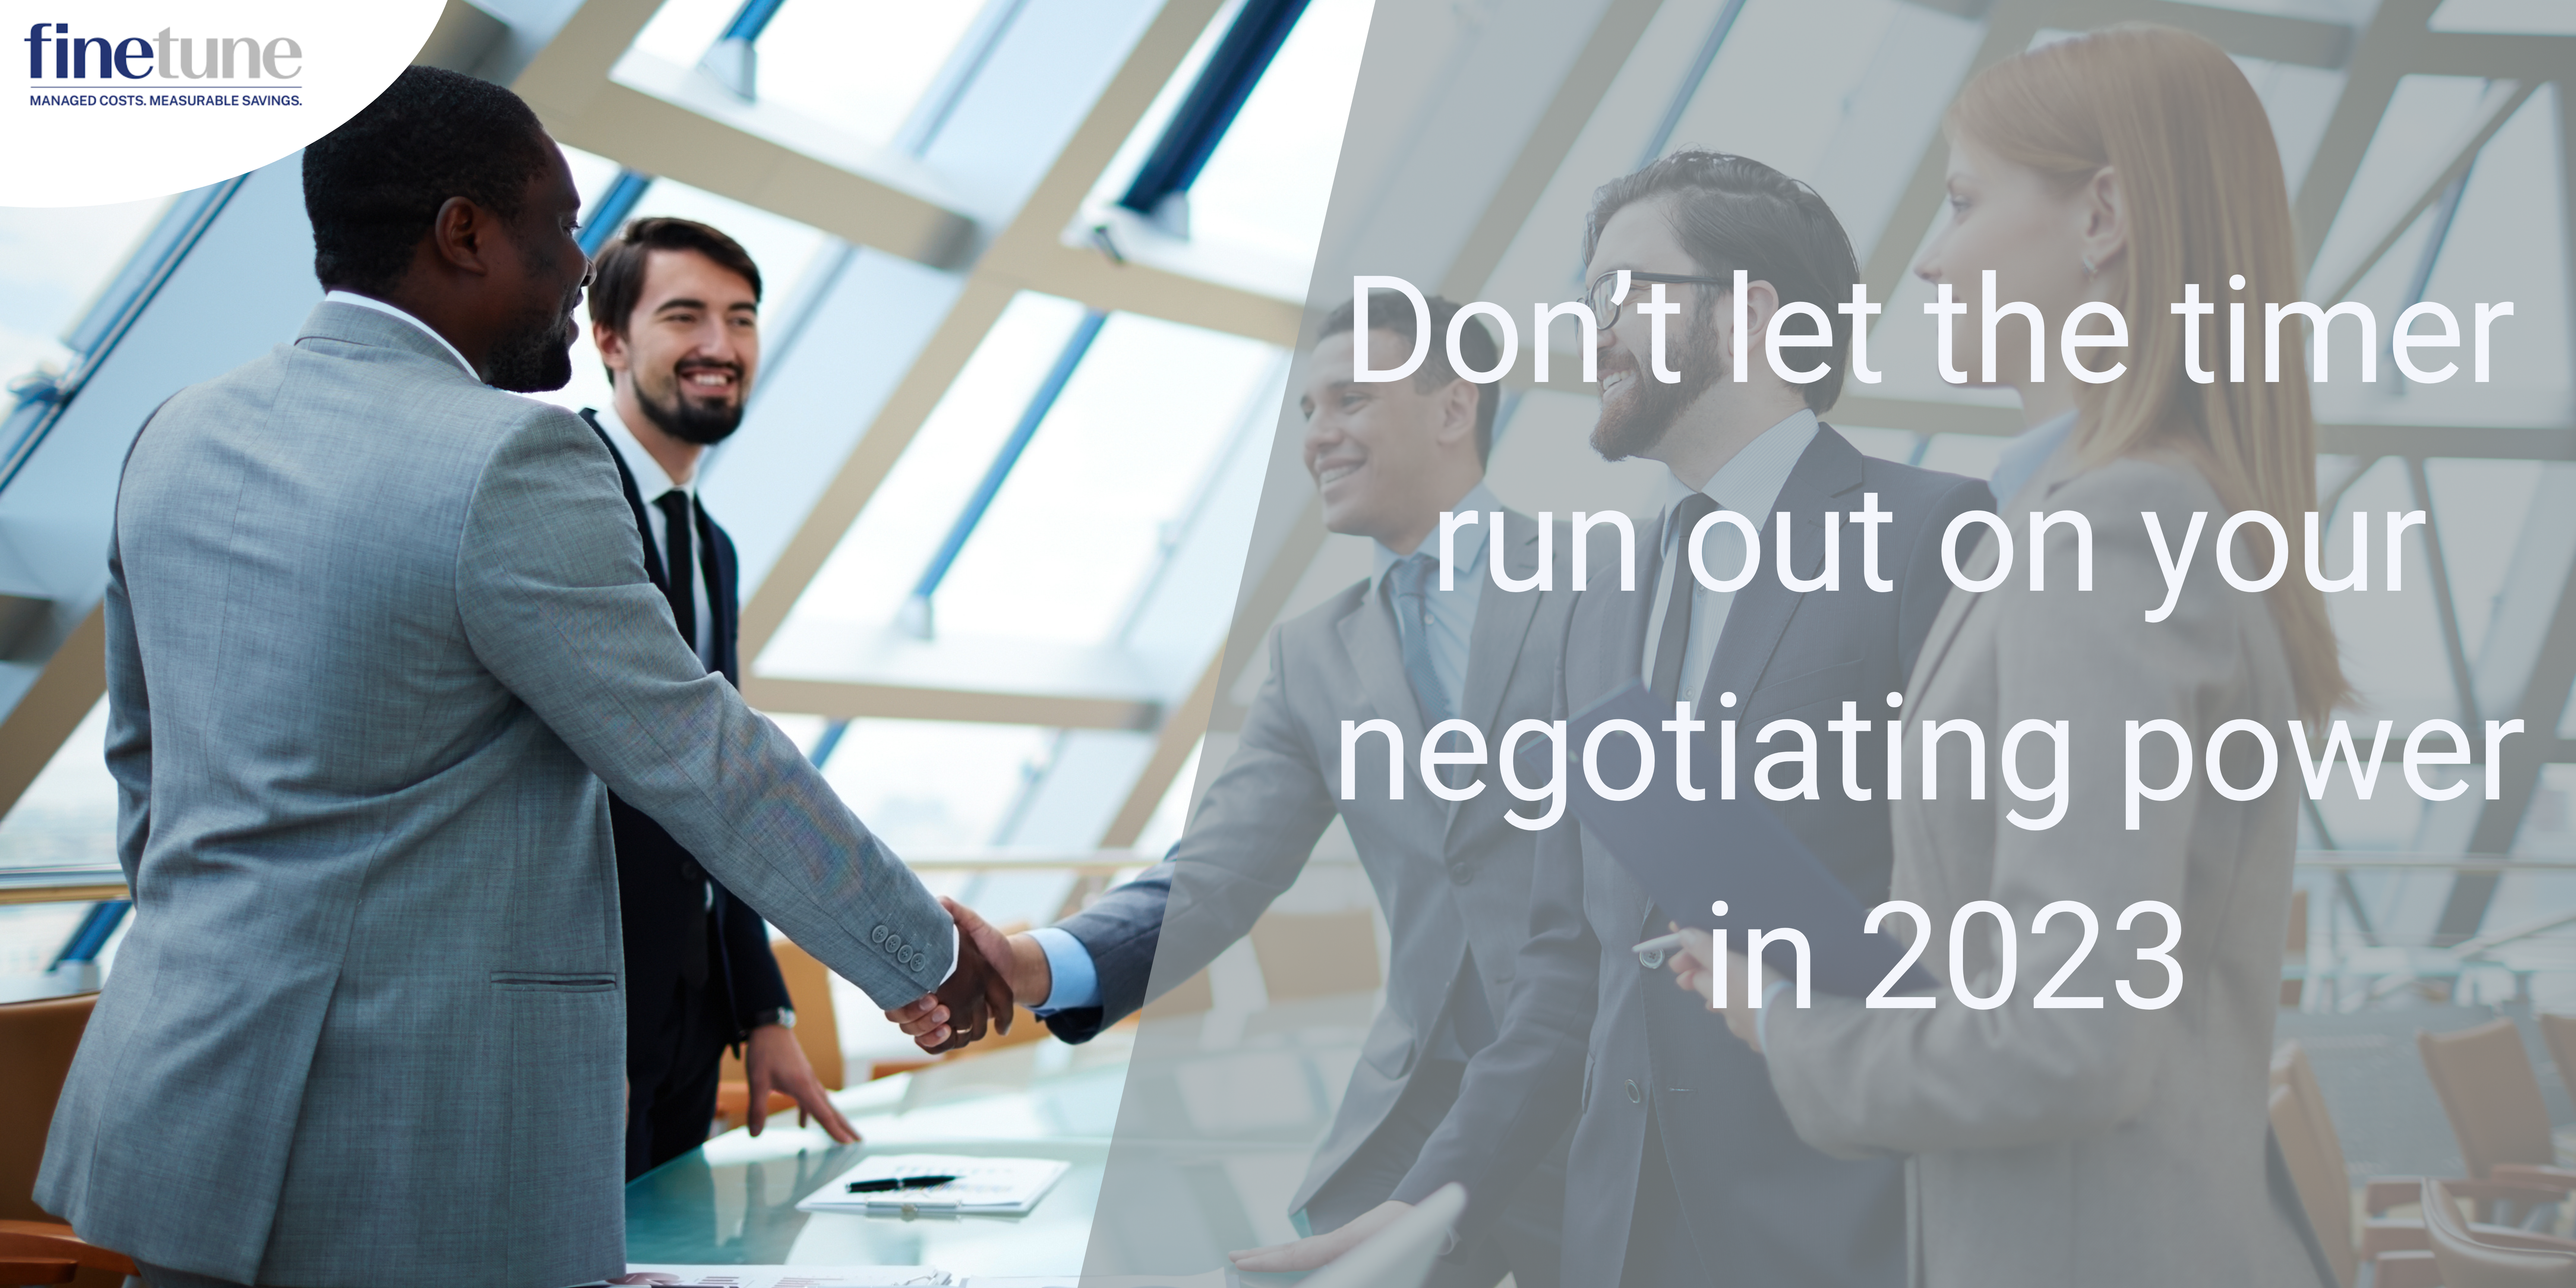 Don’t let the timer run out on your negotiating power in 2023